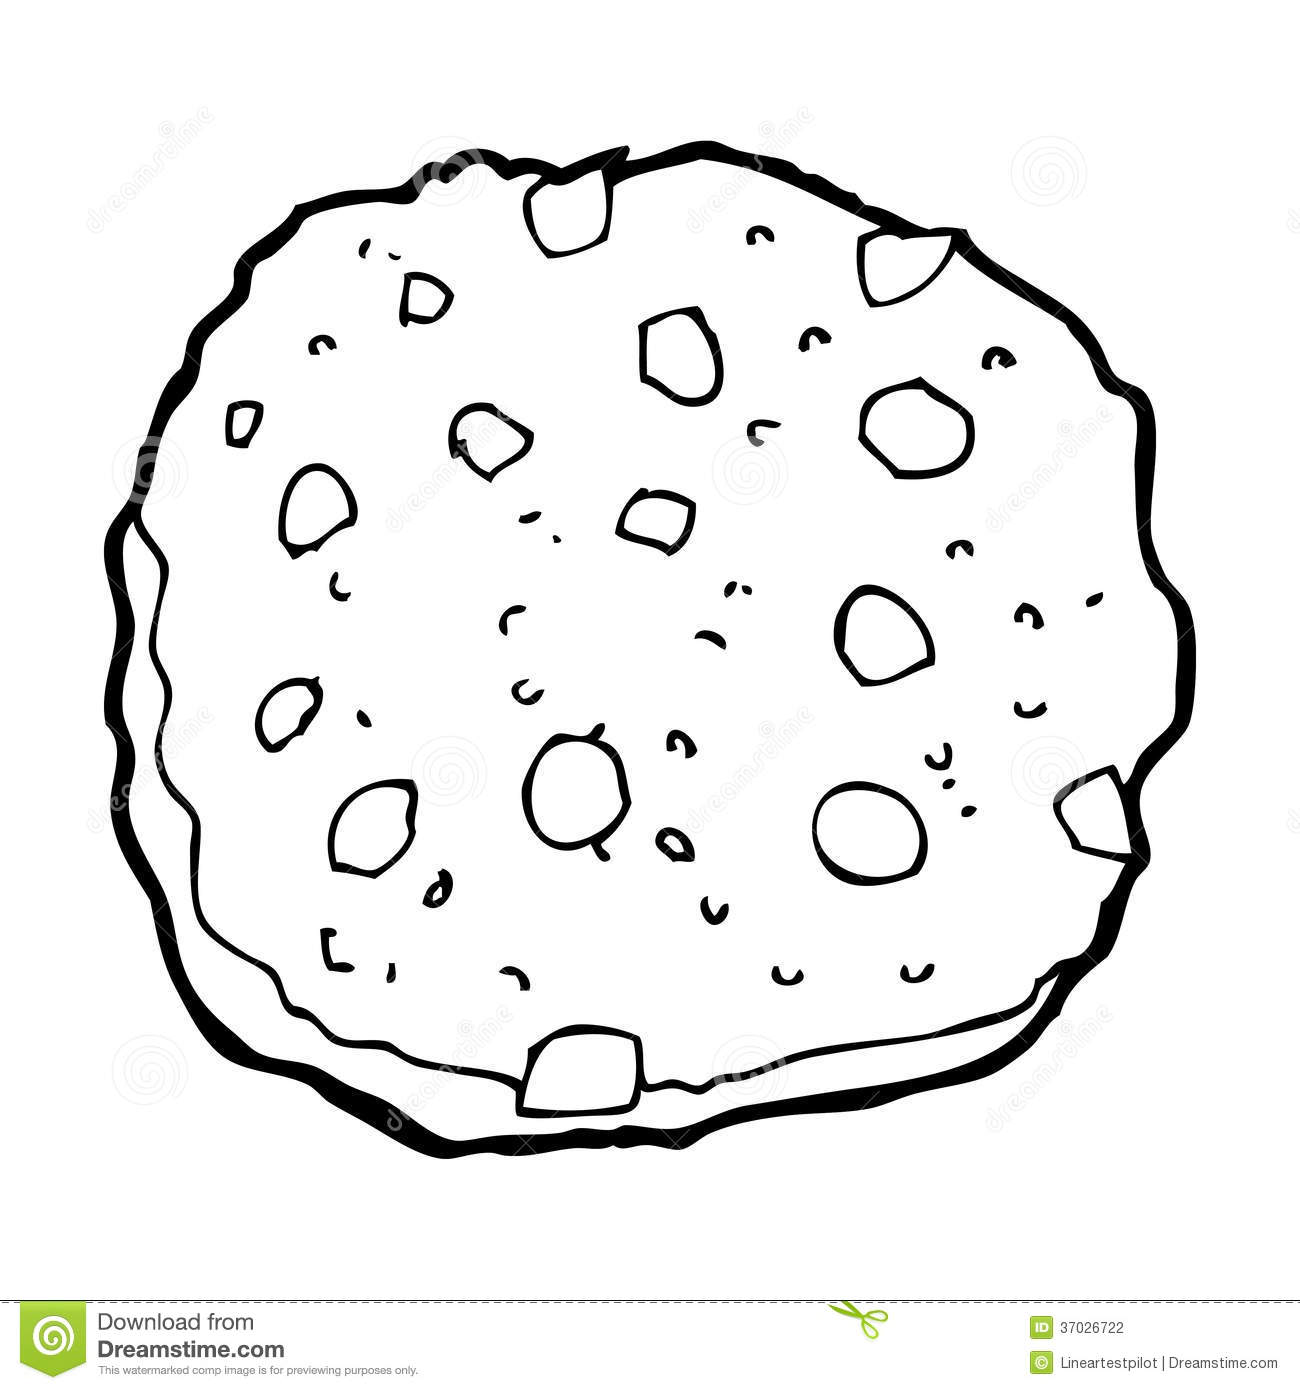 Biscuit clipart black and white 6 » Clipart Station.